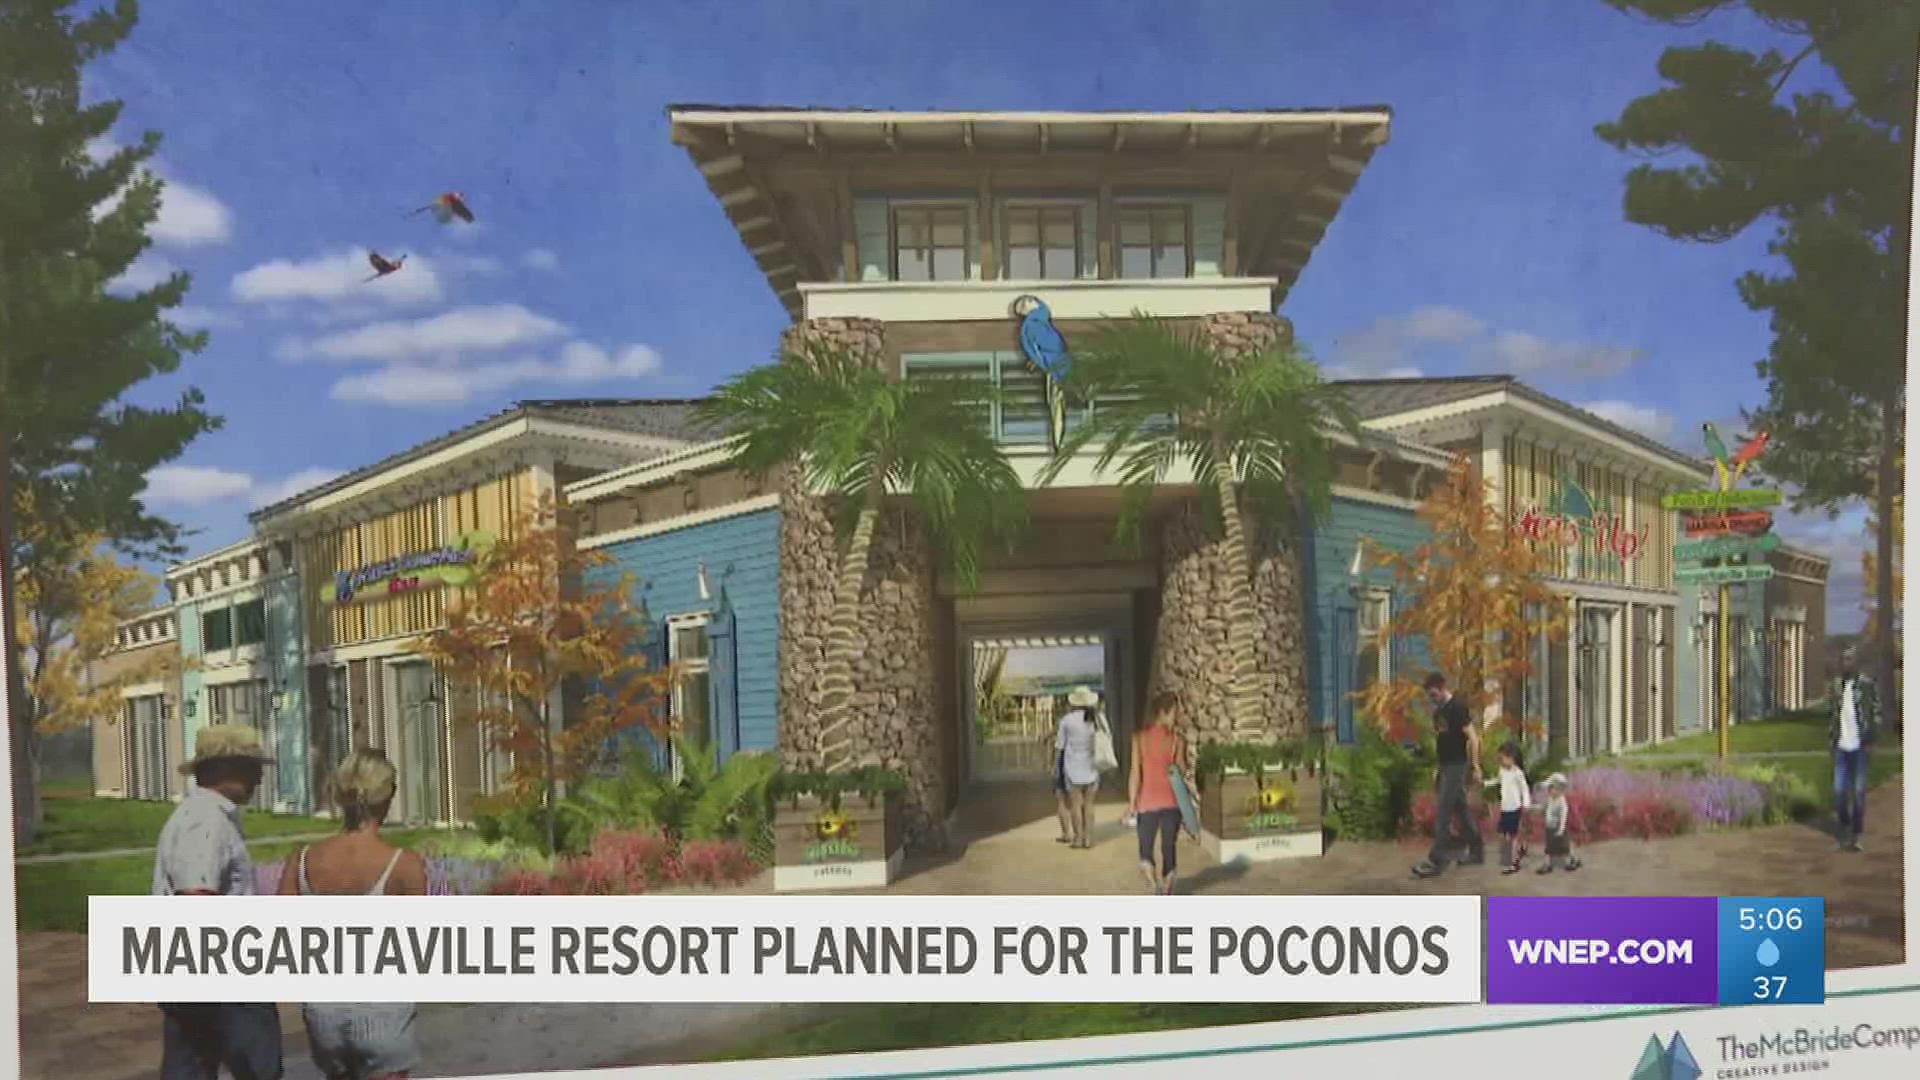 There are new plans for an old resort in the Poconos. An international brand is planning the development in Monroe County.